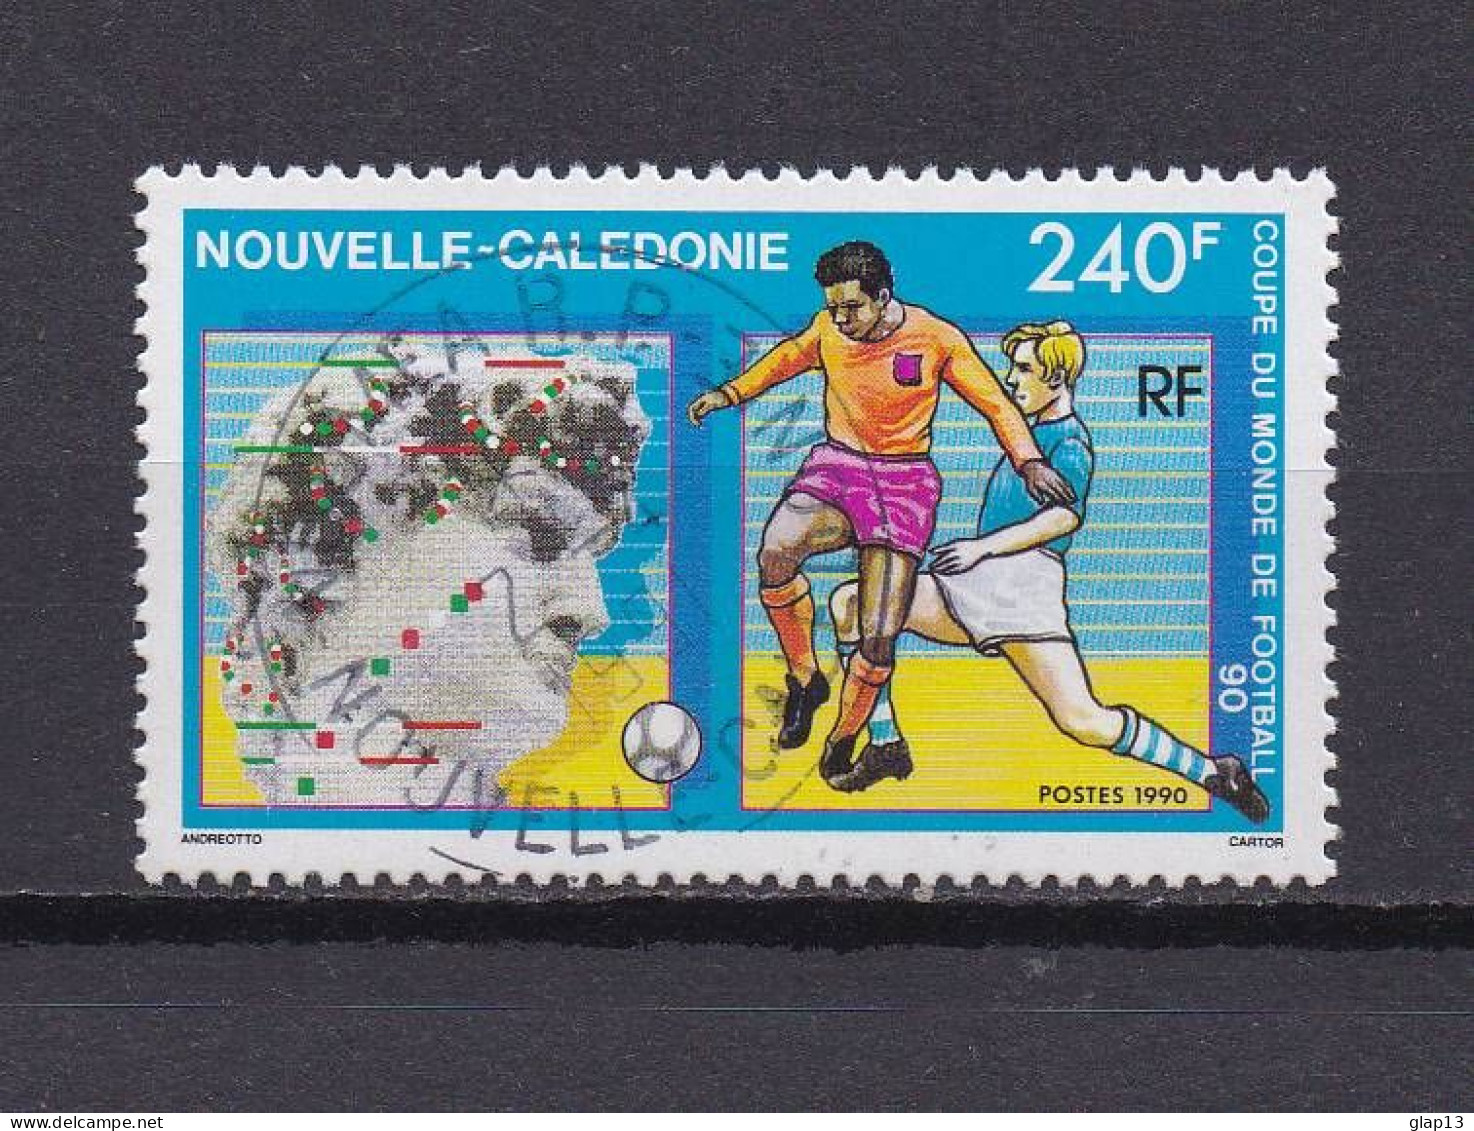 NOUVELLE-CALEDONIE 1990 TIMBRE N°596 OBLITERE FOOTBALL - Used Stamps